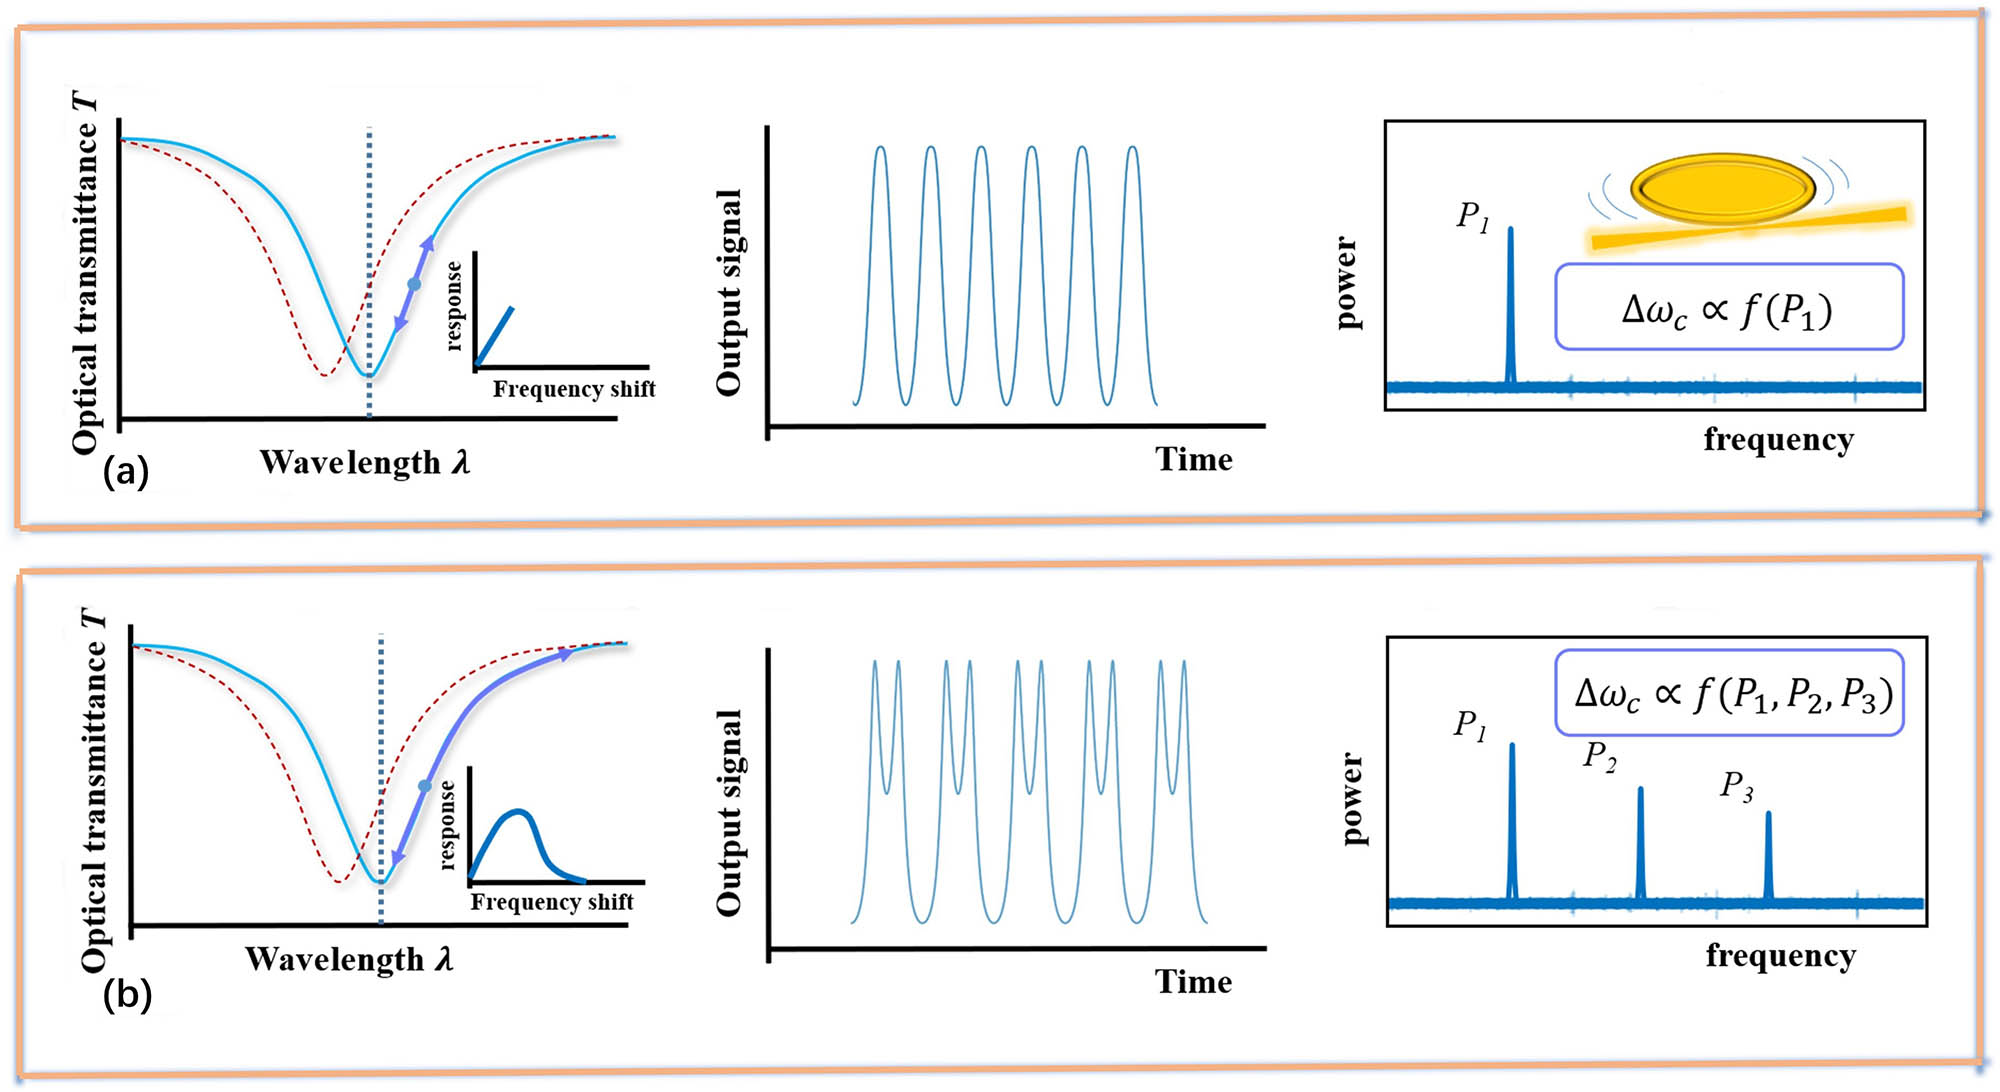 (a) Output response of the optical resonator when the optical frequency changes within its linewidth; (b) output response of the optical resonator when the optical frequency changes beyond its linewidths.